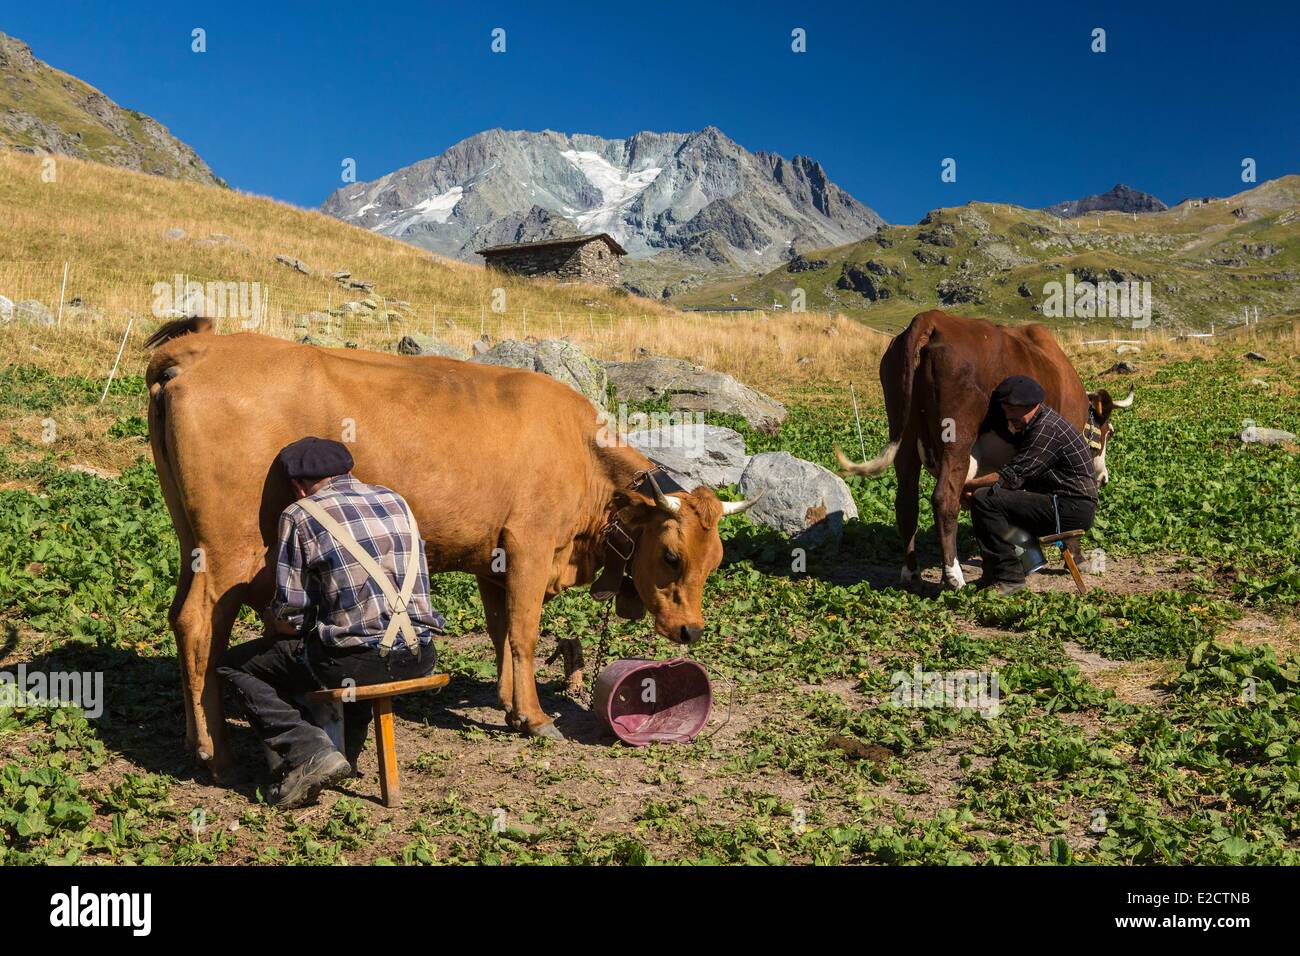 France Savoie Les Menuires La Chasse farm and restaurant of Pepe Nicolas the cow milking with a view of the Aiguille de Peclet Stock Photo